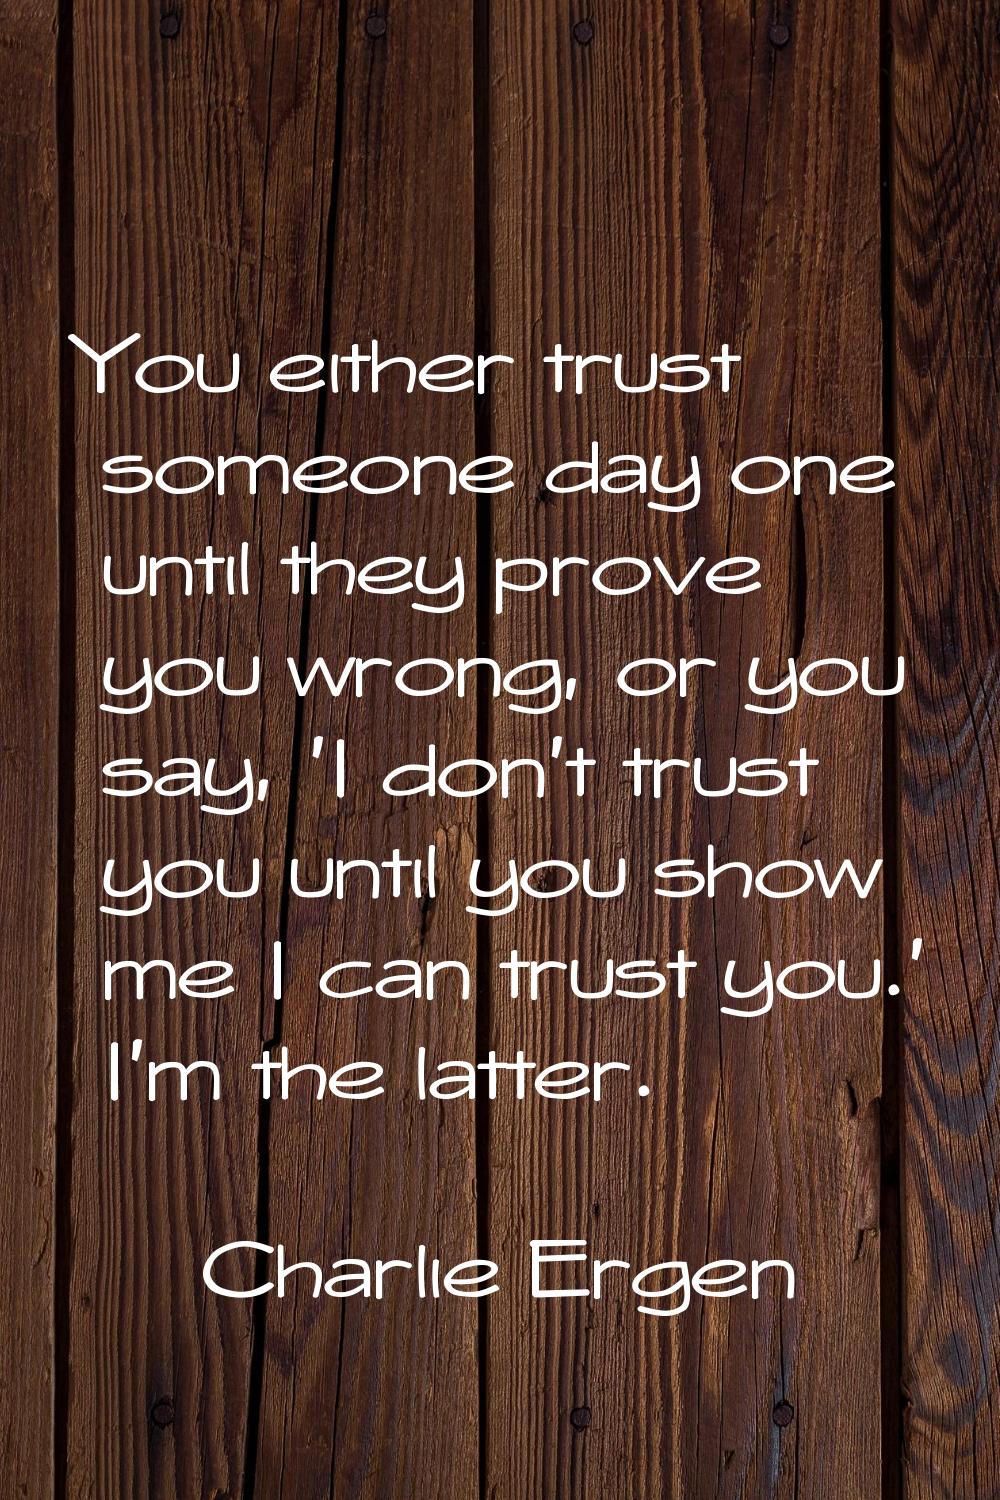 You either trust someone day one until they prove you wrong, or you say, 'I don't trust you until y